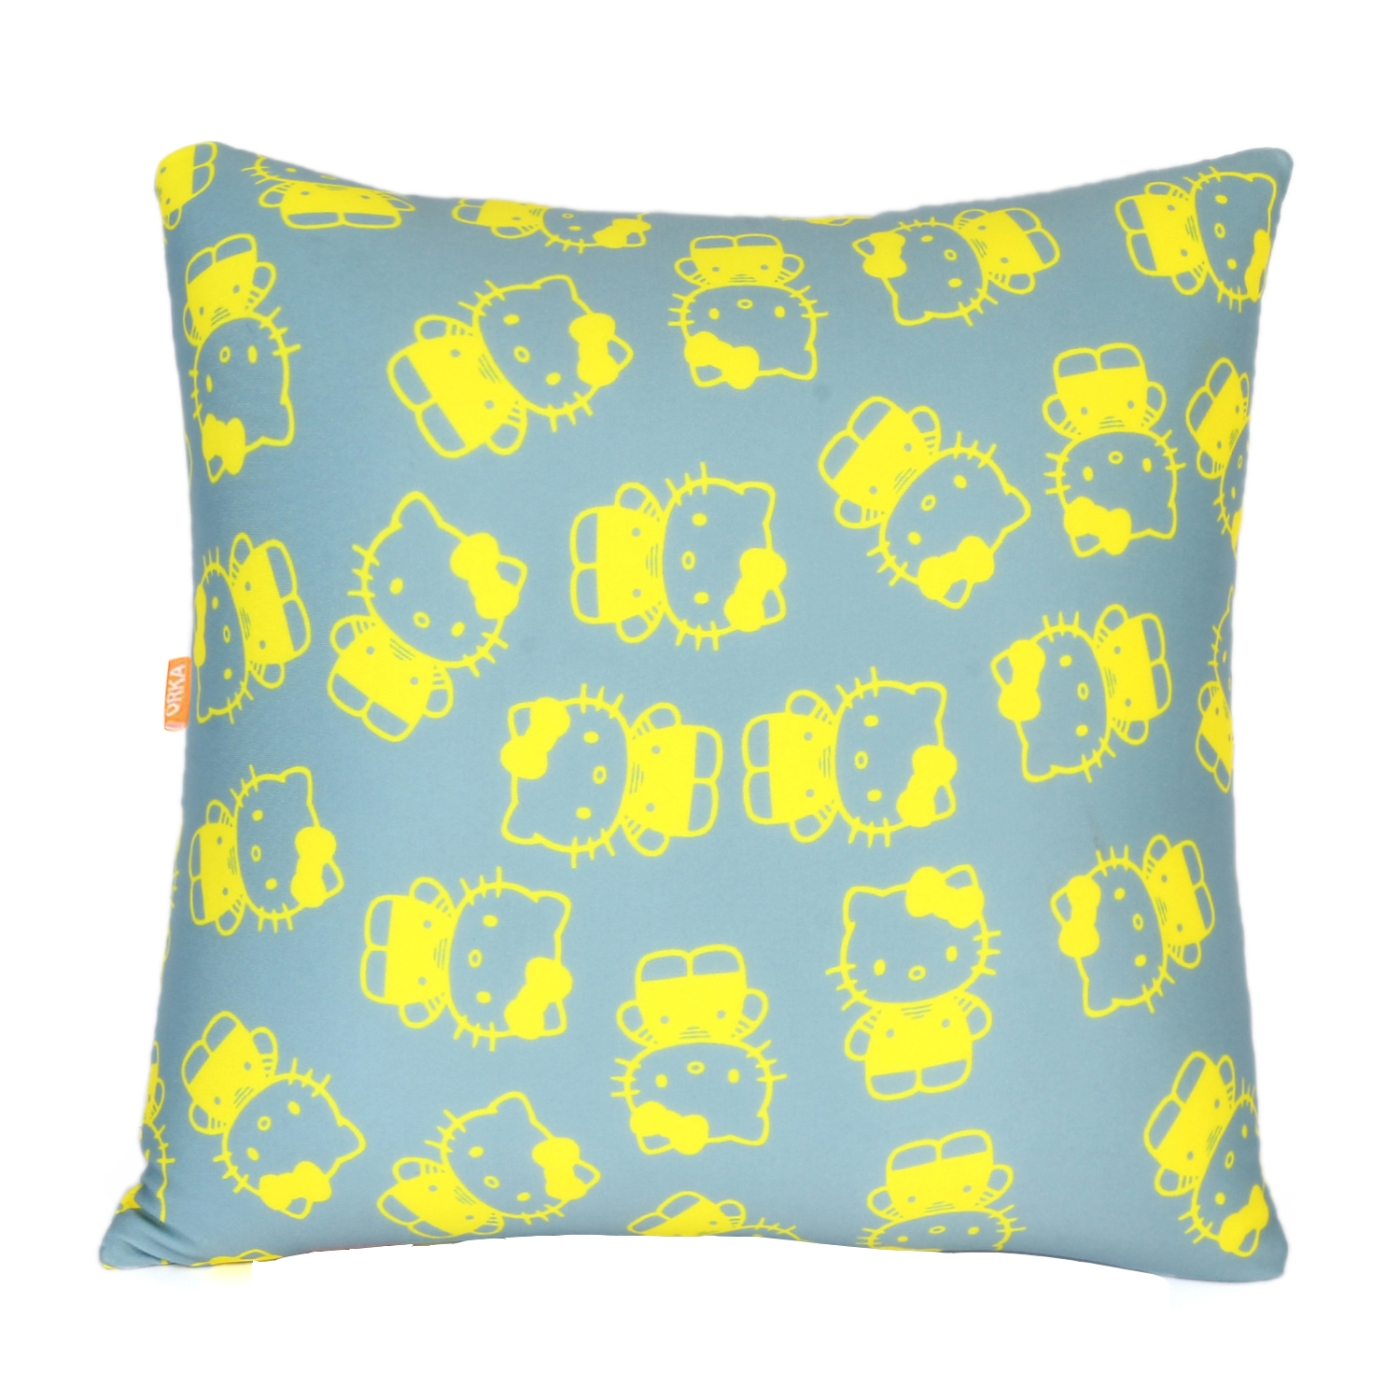 ORKA Digital Printed Spandex Filled With Microbeads Square Cushion 14 X 14 Inch - Grey, Yellow  